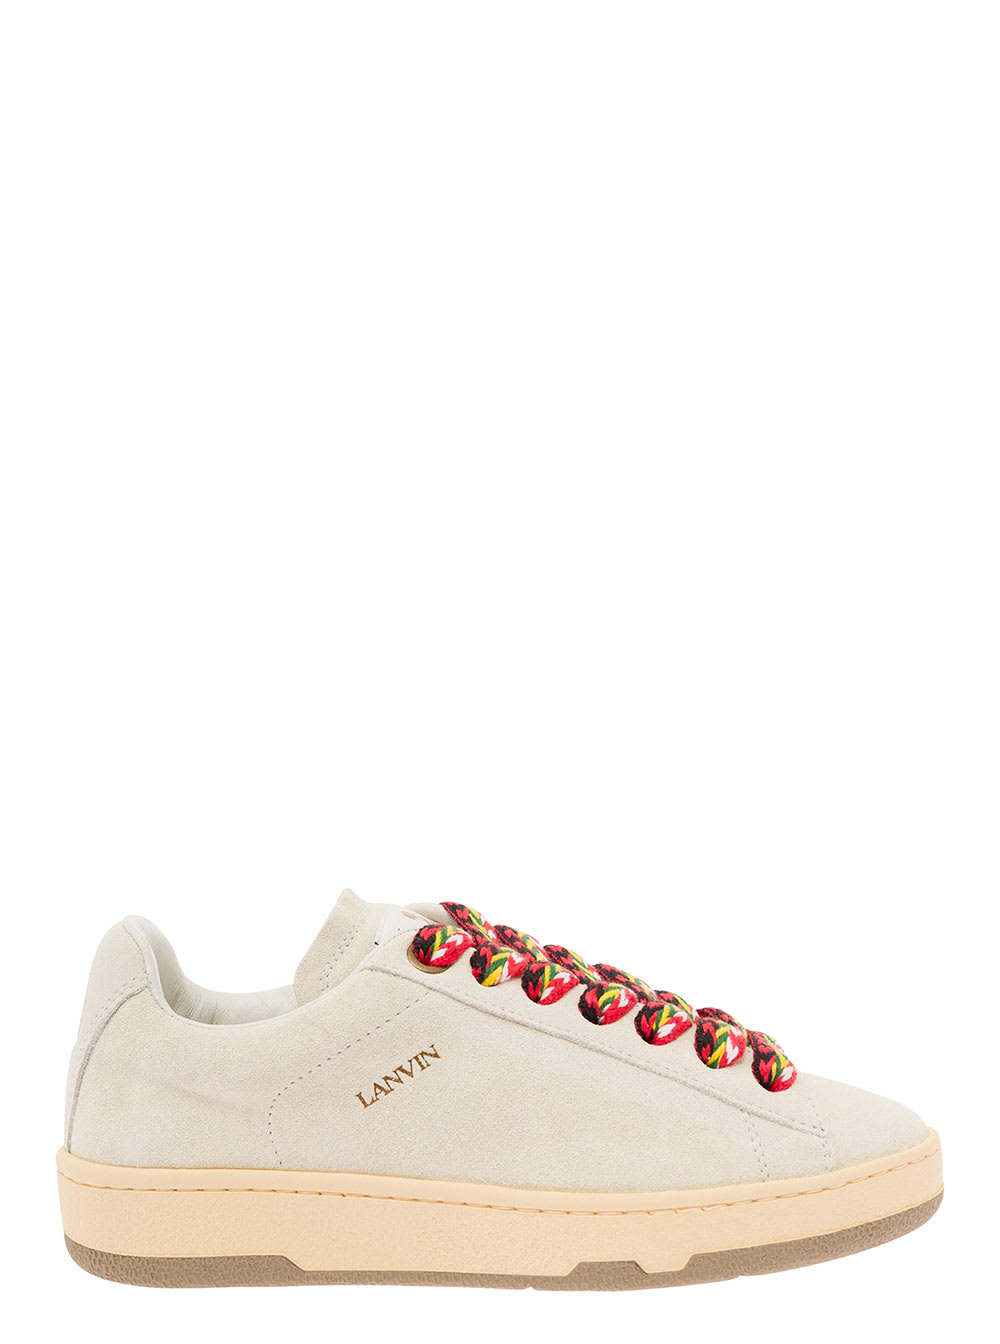 Lanvin Lite Curb White Low Top Sneakers With Oversized Multicolor Laces In Leather Woman